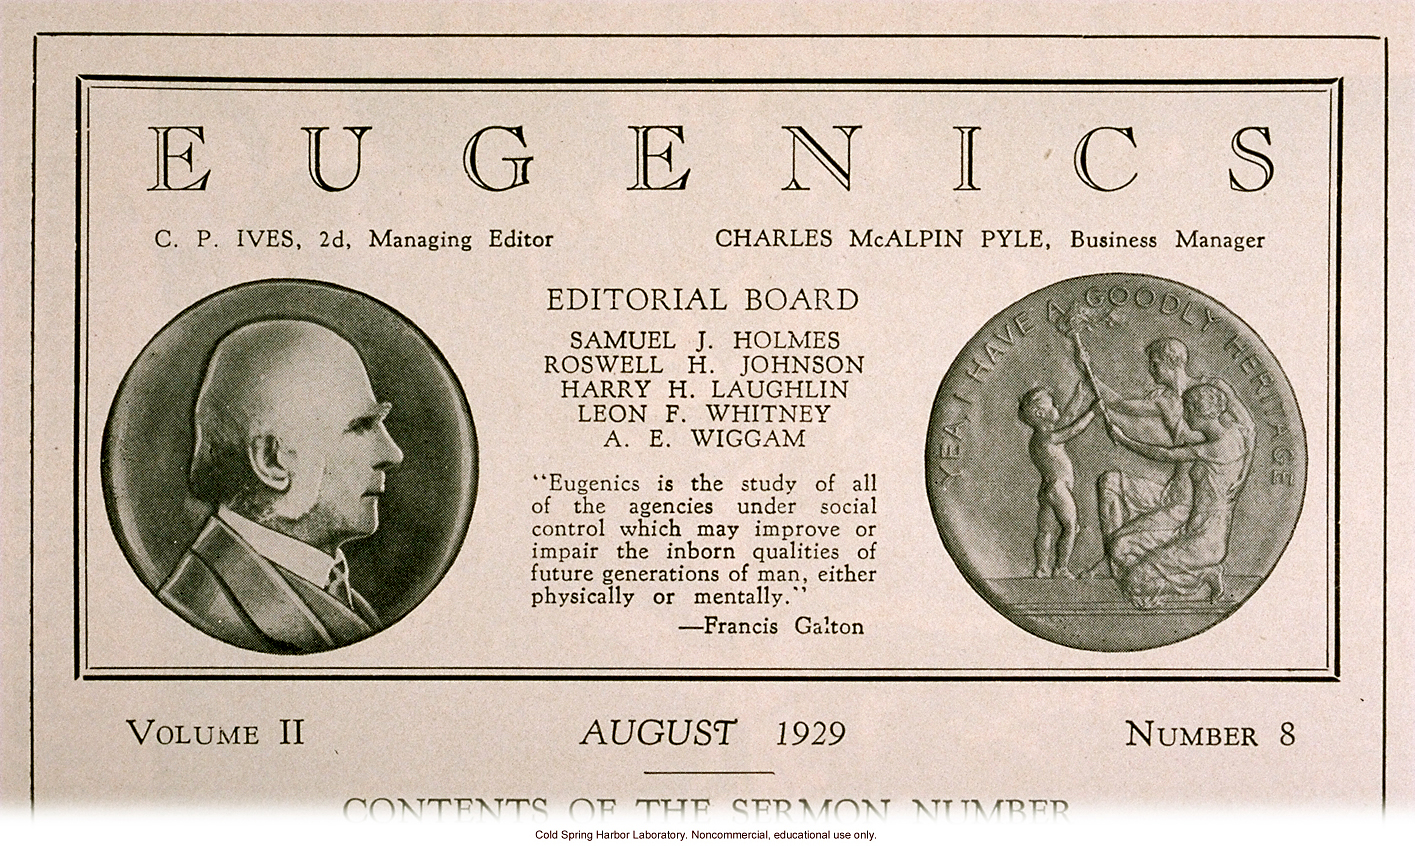 Eugenics: A Journal of Race Betterment (vol II:8), title page including Francis Galton's definition of eugenics and Fitter Families medal